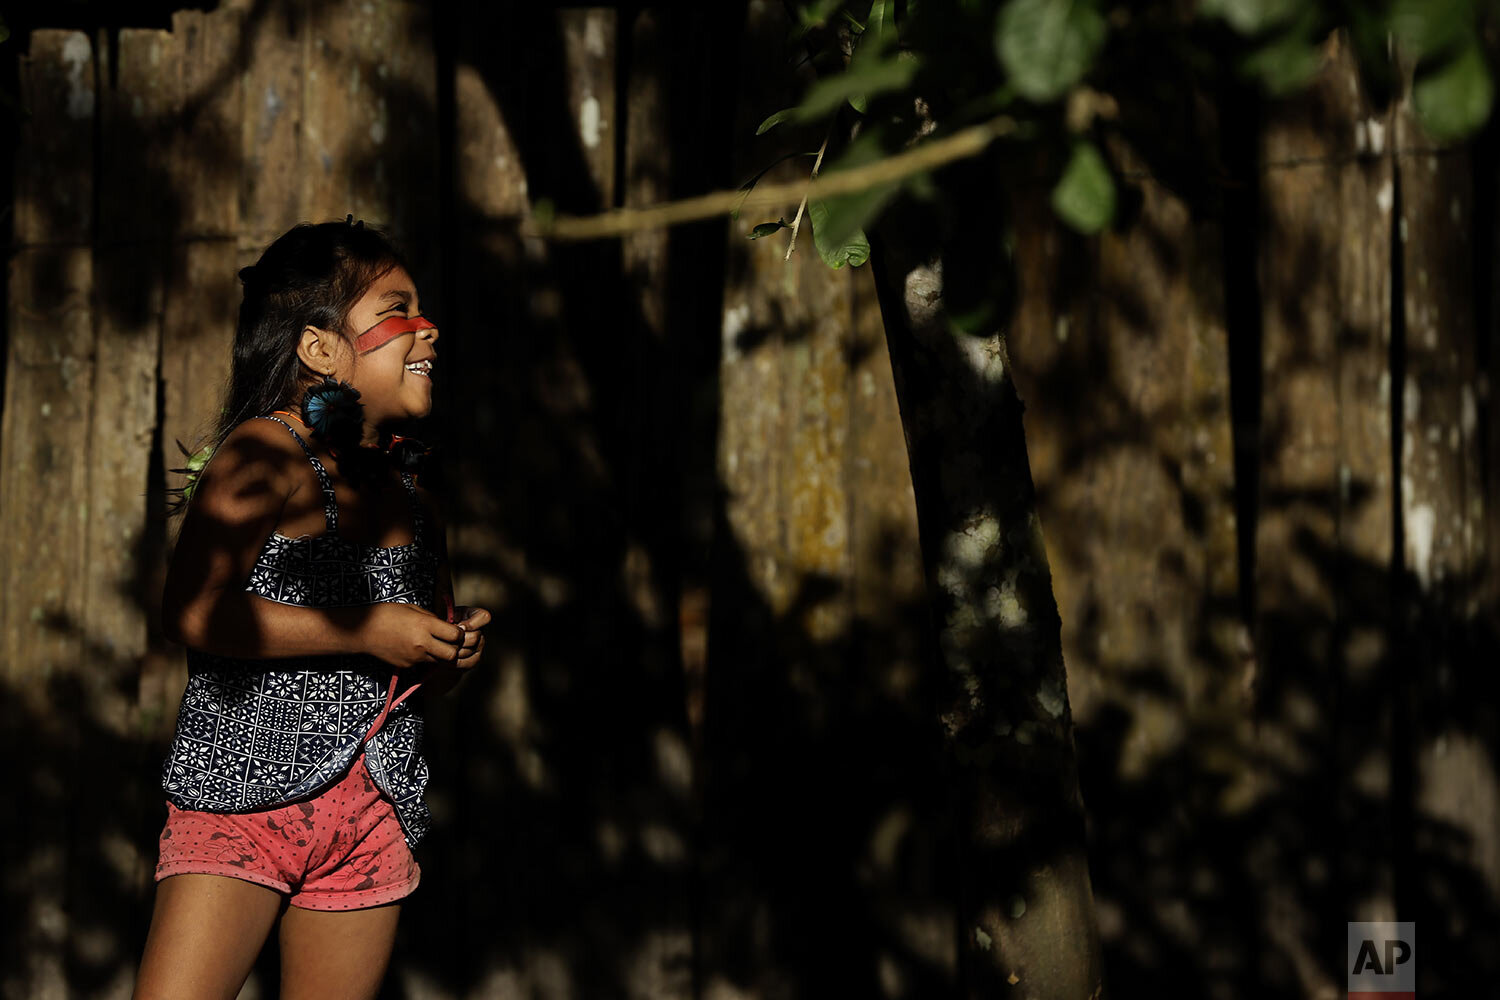  A Tenetehara Indigenous child Mayra Muxi Tembe, plays outside her home in the Alto Rio Guama Indigenous Territory, near Paragominas, in the northern Brazilian state of Para, Monday, Sept. 7, 2020. (AP Photo/Eraldo Peres) 